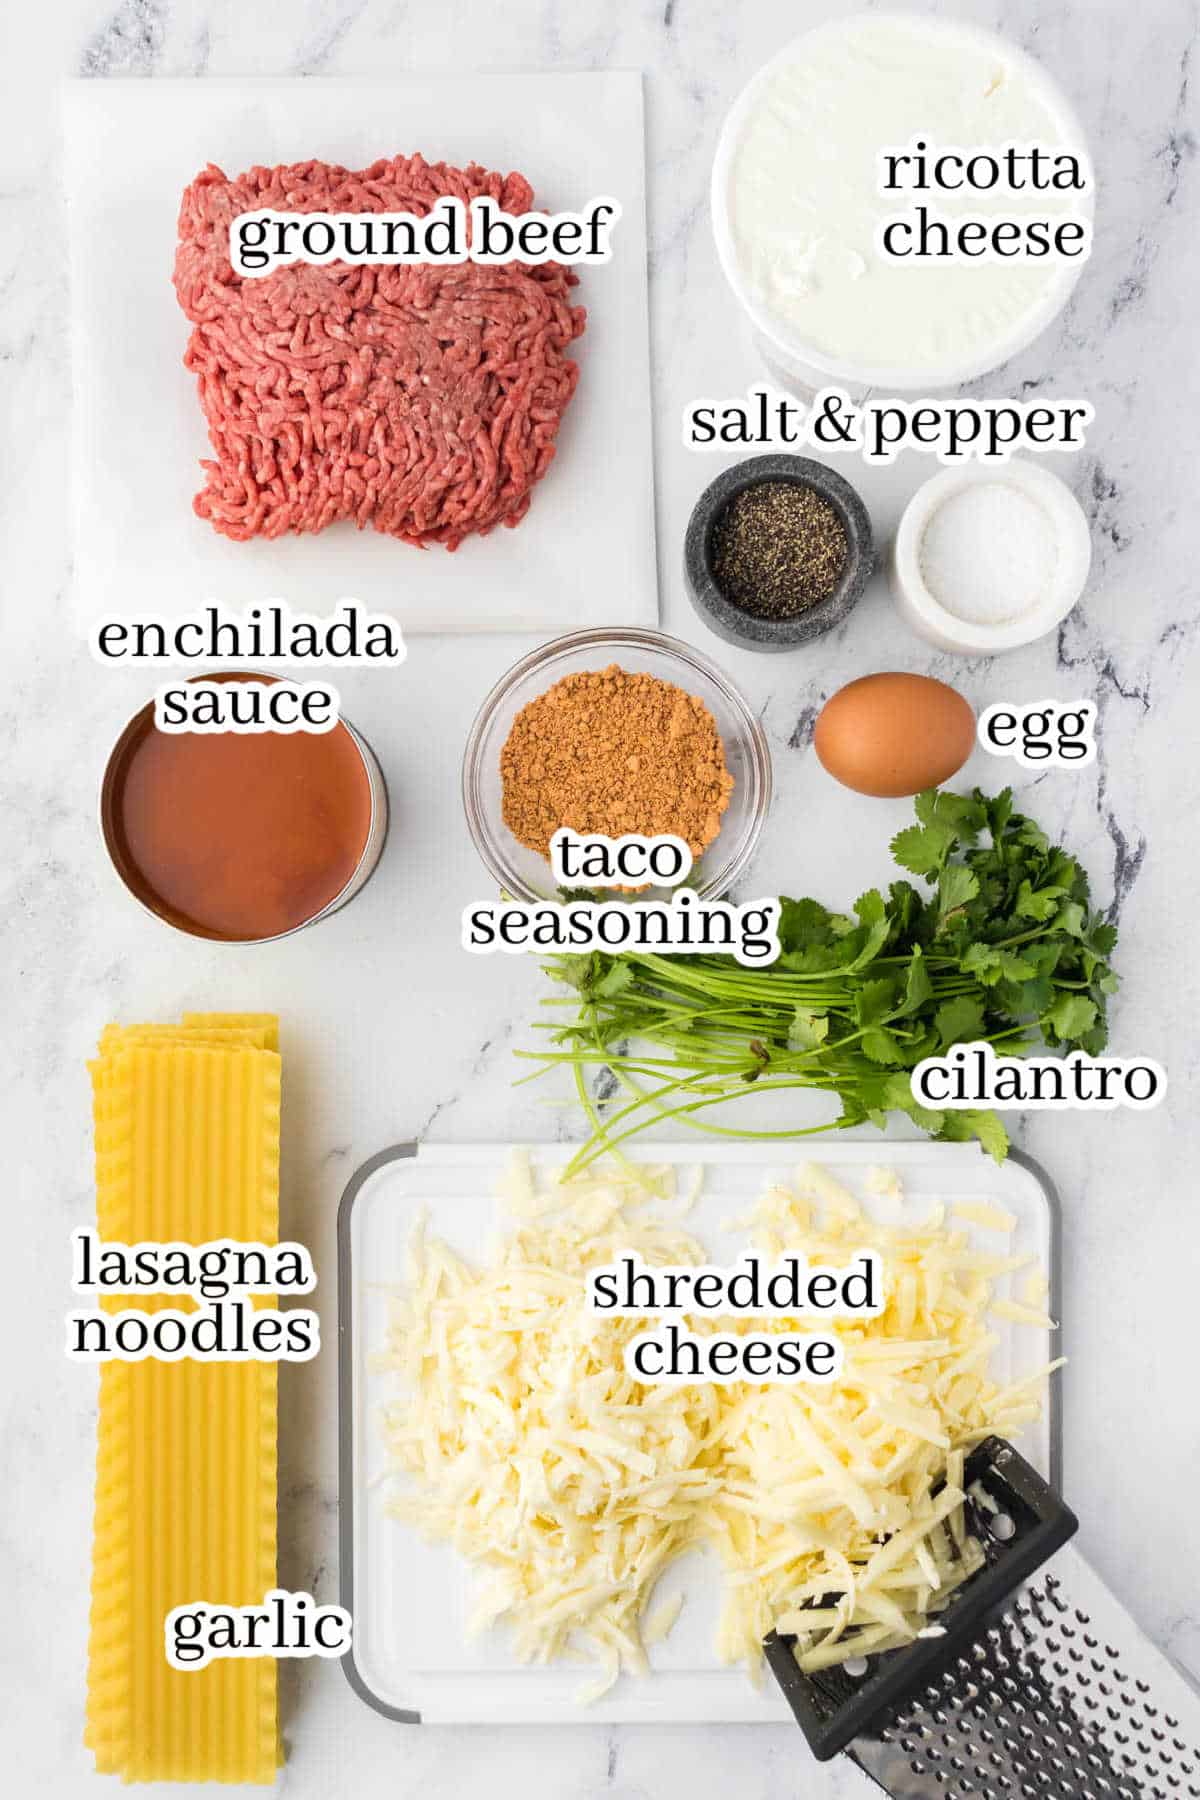 Ingredients to make the casserole recipe. With print overlay for clarification.